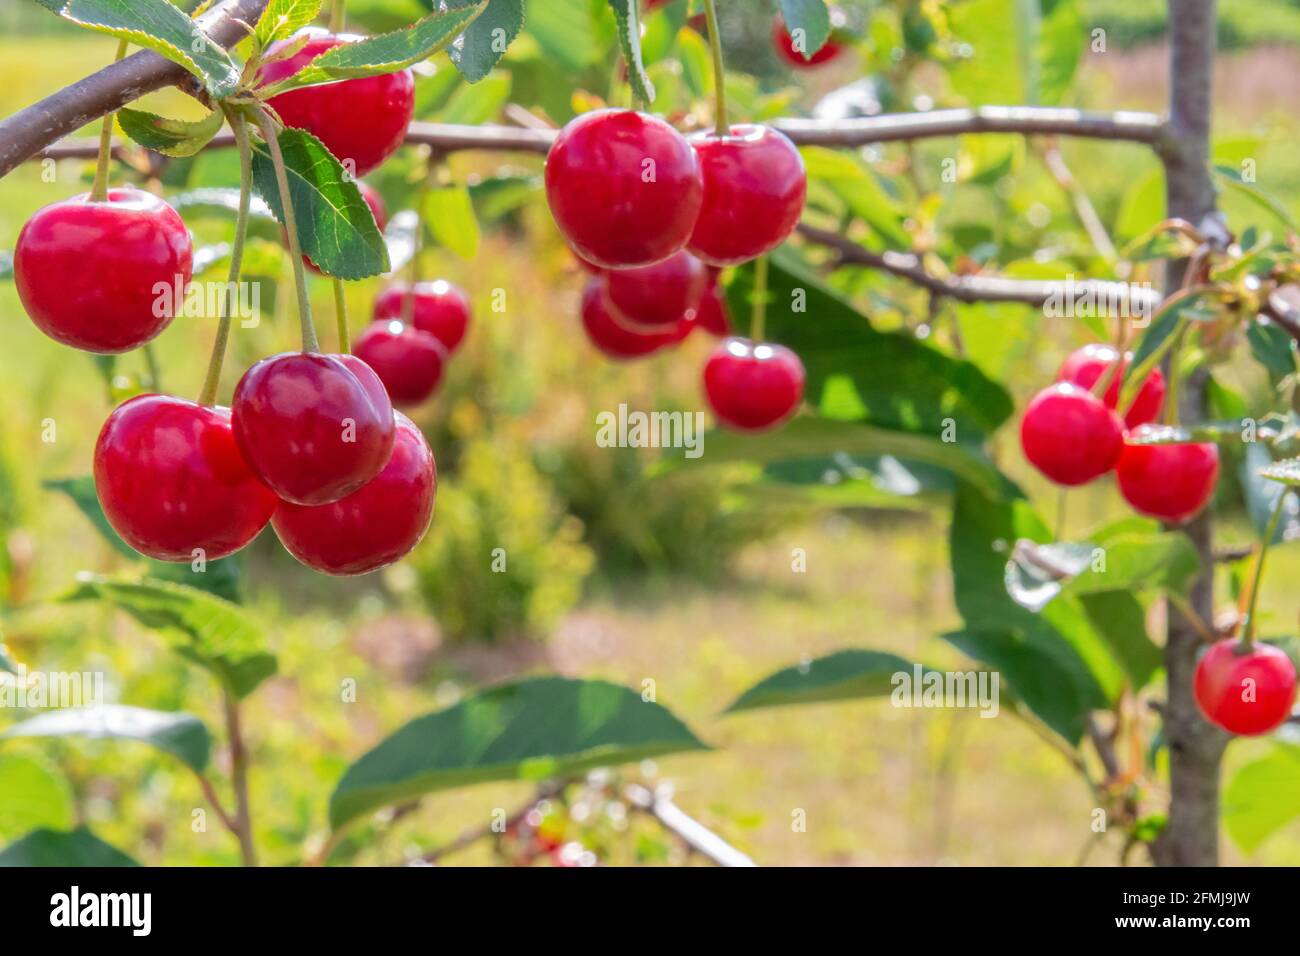 Fresh red cherry berries on tree branch in garden. Close-up view of the  organic cherry berry hanging on twigs. Mature red berries of cherry tree  Stock Photo - Alamy